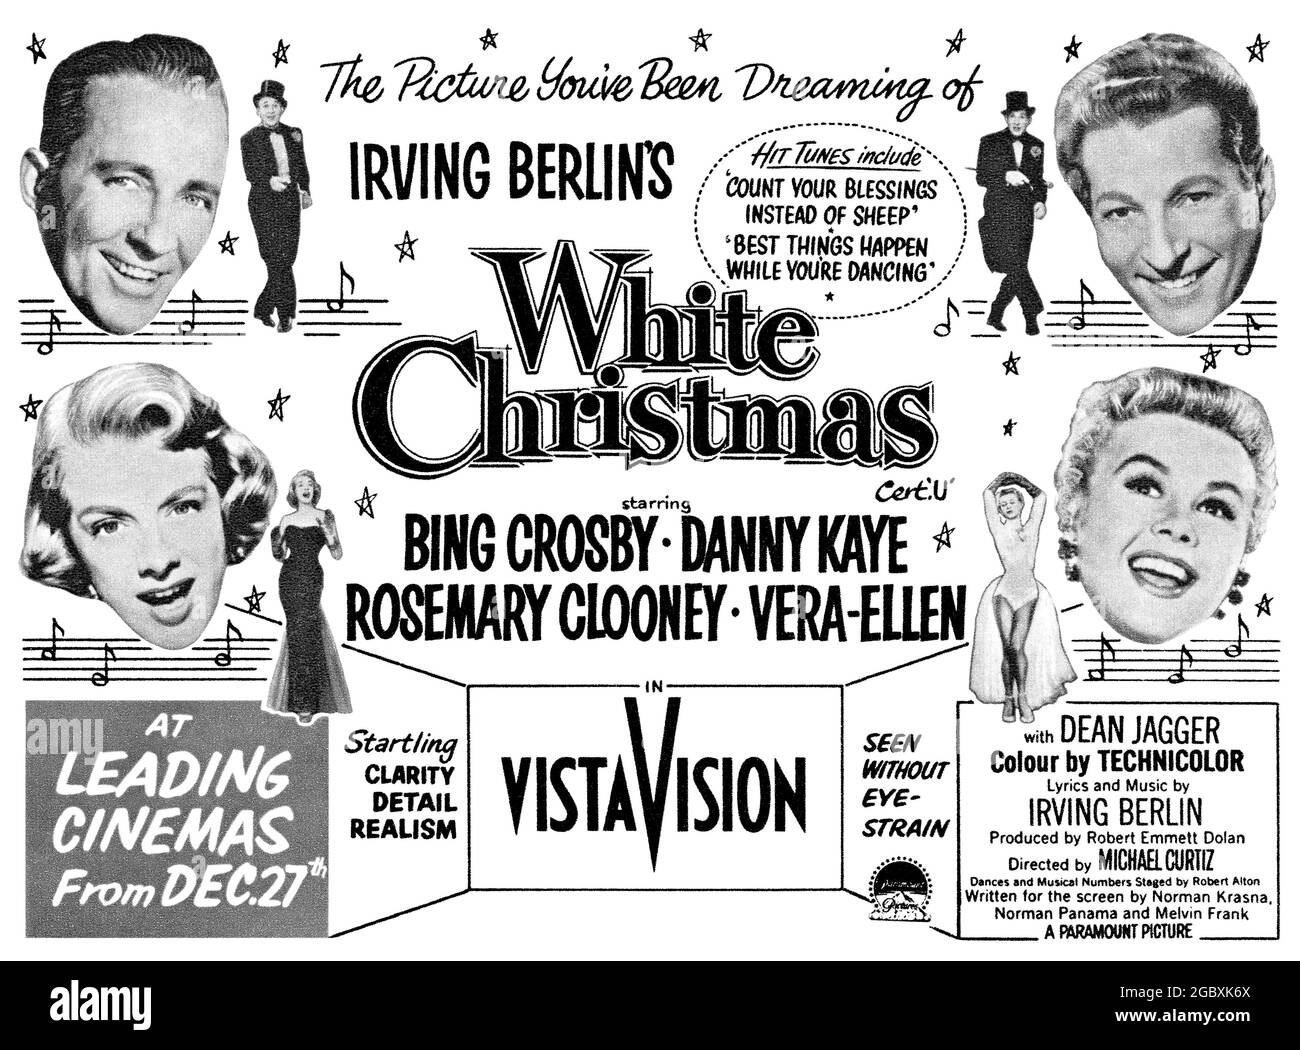 1954 British advertisement for the movie White Christmas, starring Bing Crosby, Danny Kaye, Rosemary Clooney and Vera-Ellen. Music and lyrics by Irving Berlin, directed by Michael Curtiz. Stock Photo